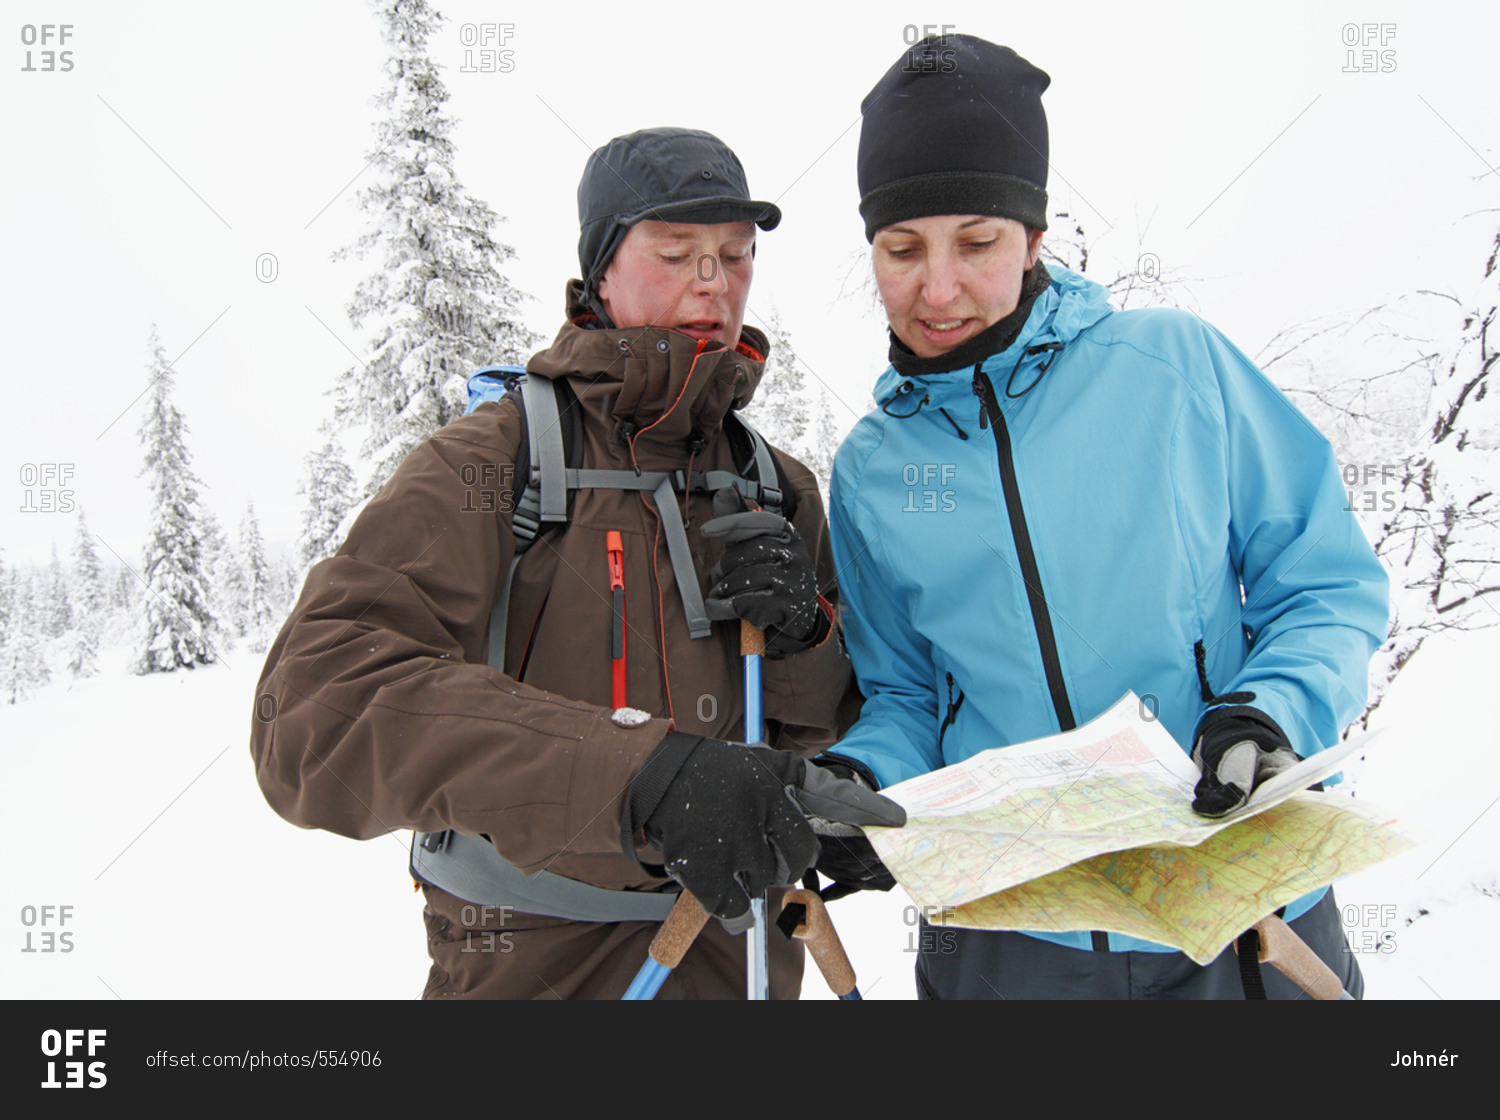 Women looking at map in winter forest